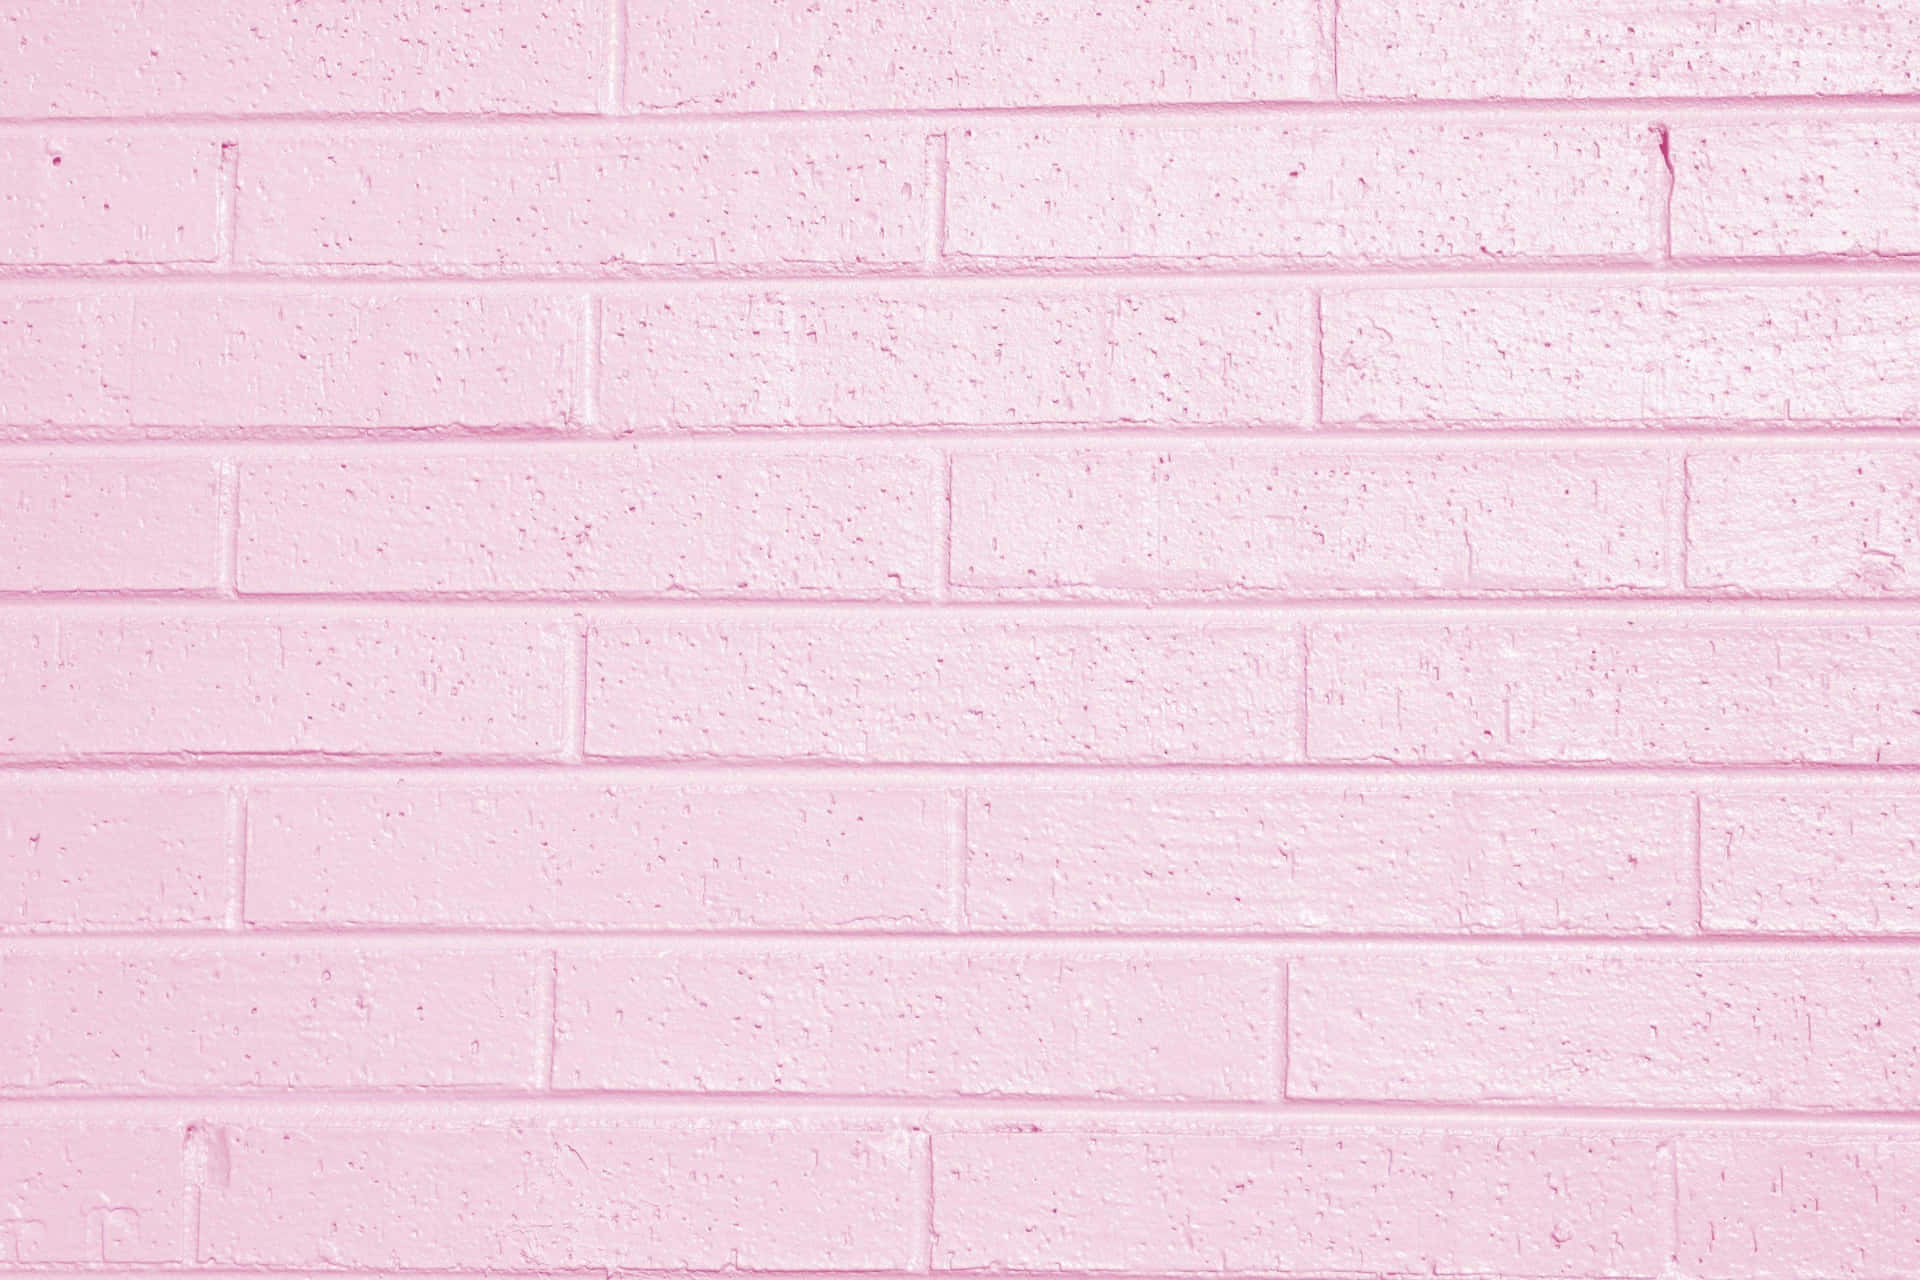 A pink background with a dreamlike aesthetic